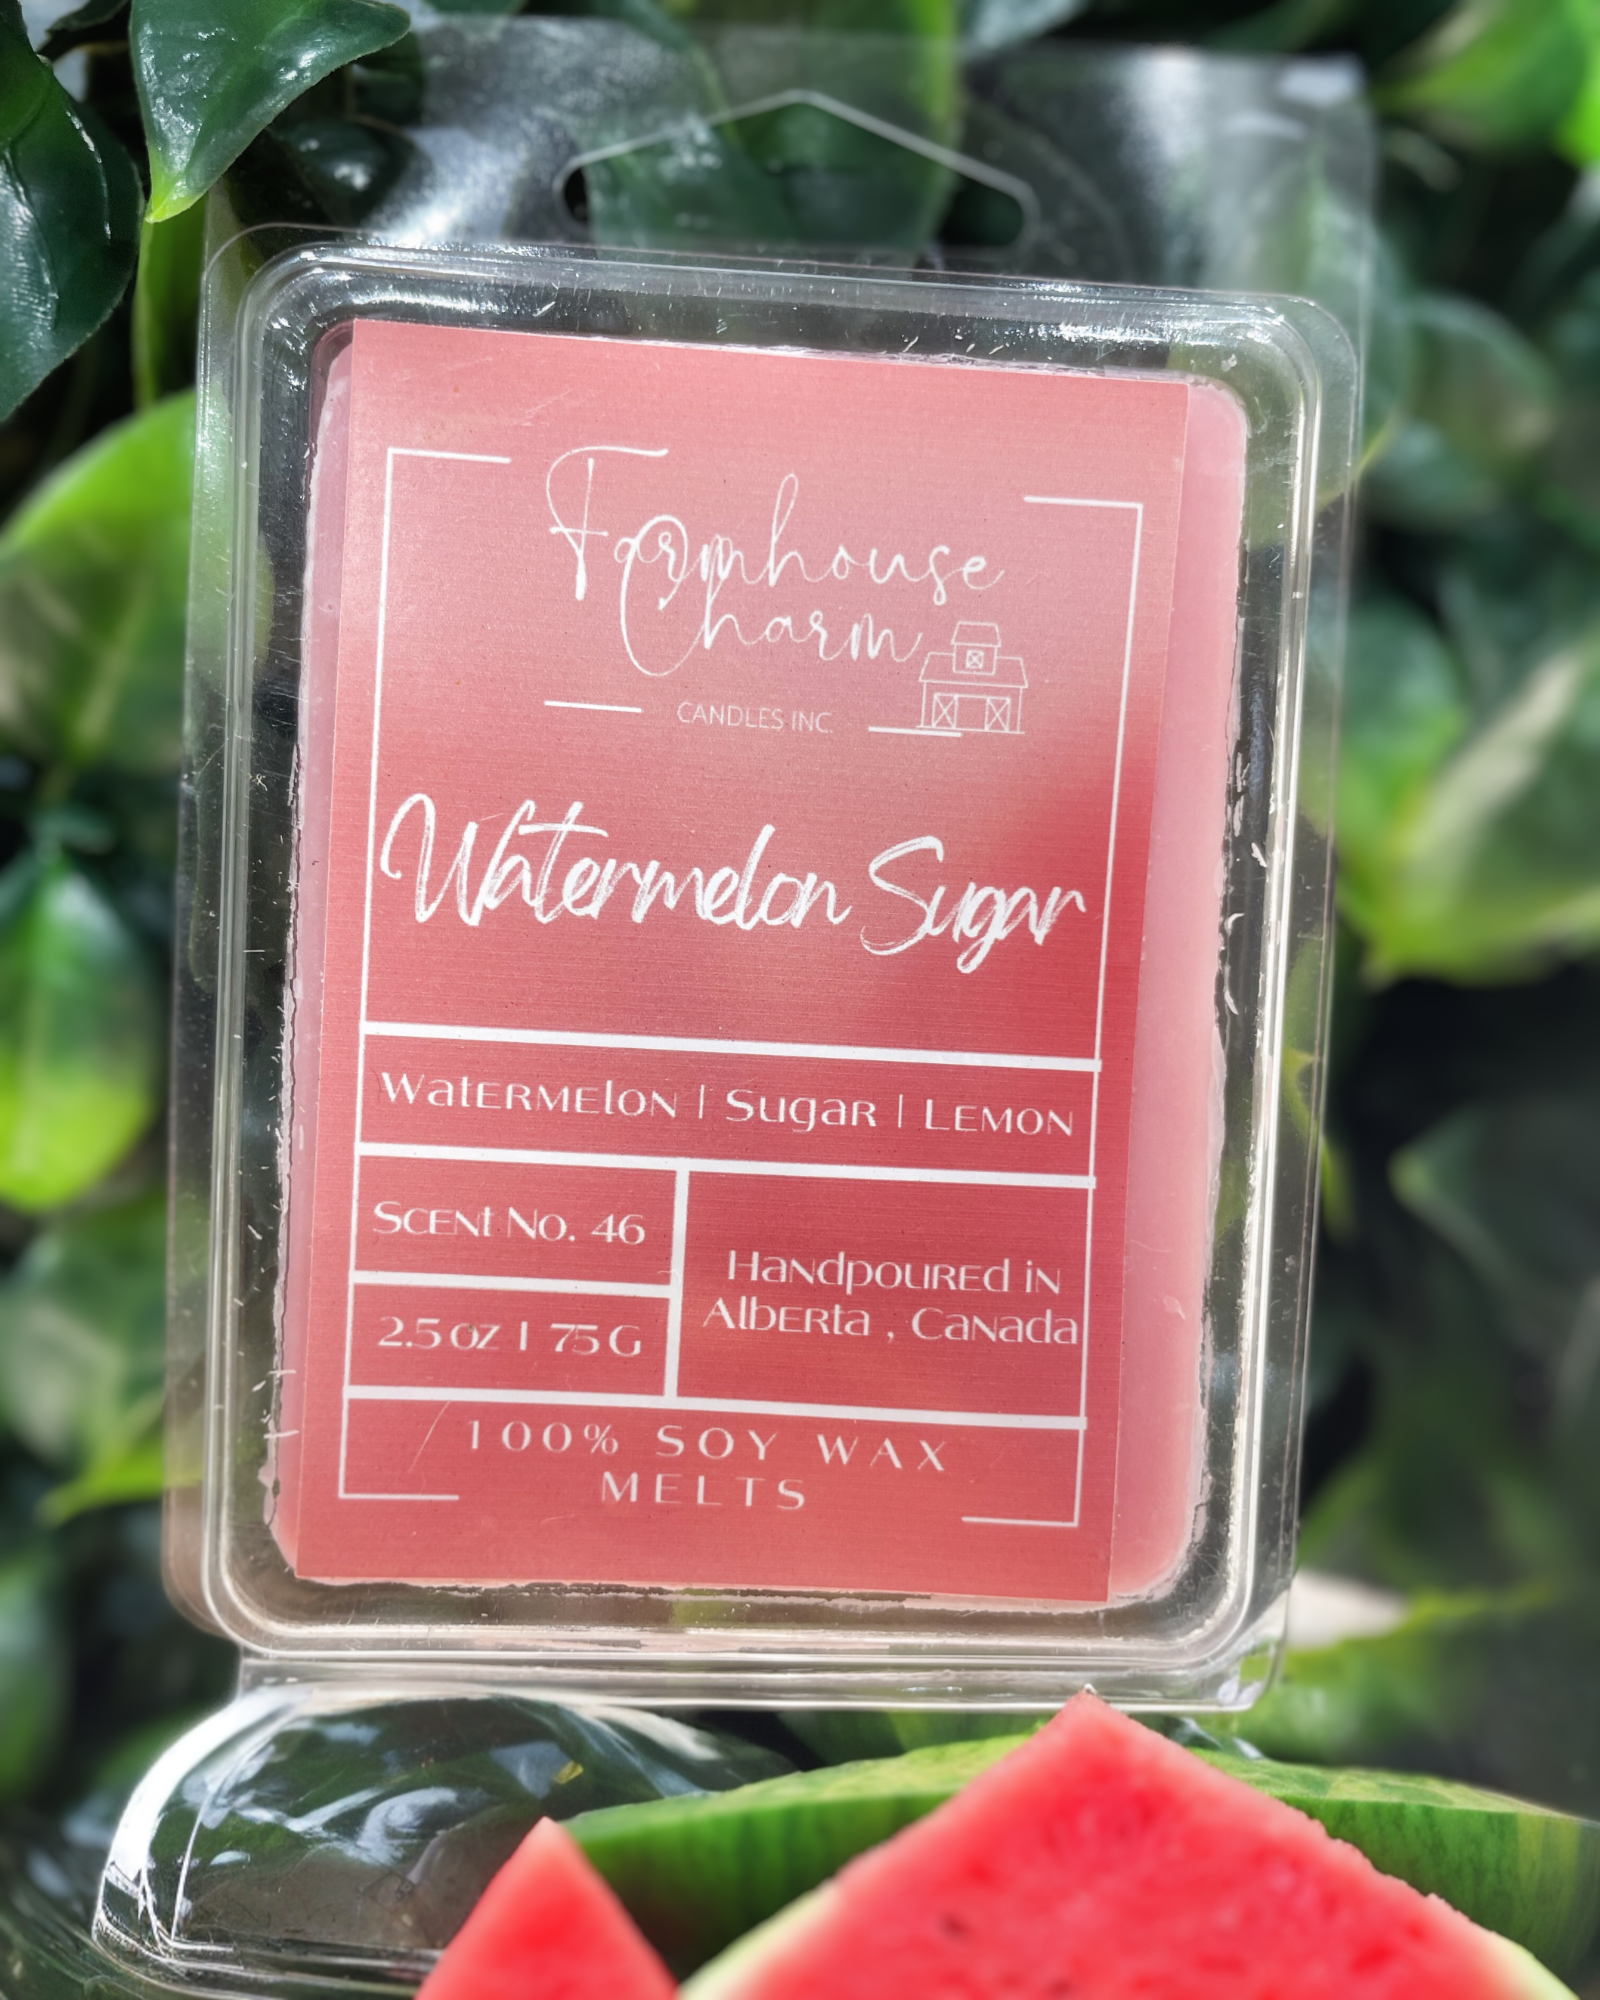 Elevate Your Summer Mood with Watermelon Sugar Soy Wax Melts- Farmhouse Charm .  Bring the summer season into your home with our Watermelon Sugar Soy Wax Melts- Farmhouse Charm !  Infused with refreshing and bright scent of watermelon, spring water, and lemon, this wax melts will add a touch of summer to your living space. www.farmhousecharmcandles.com